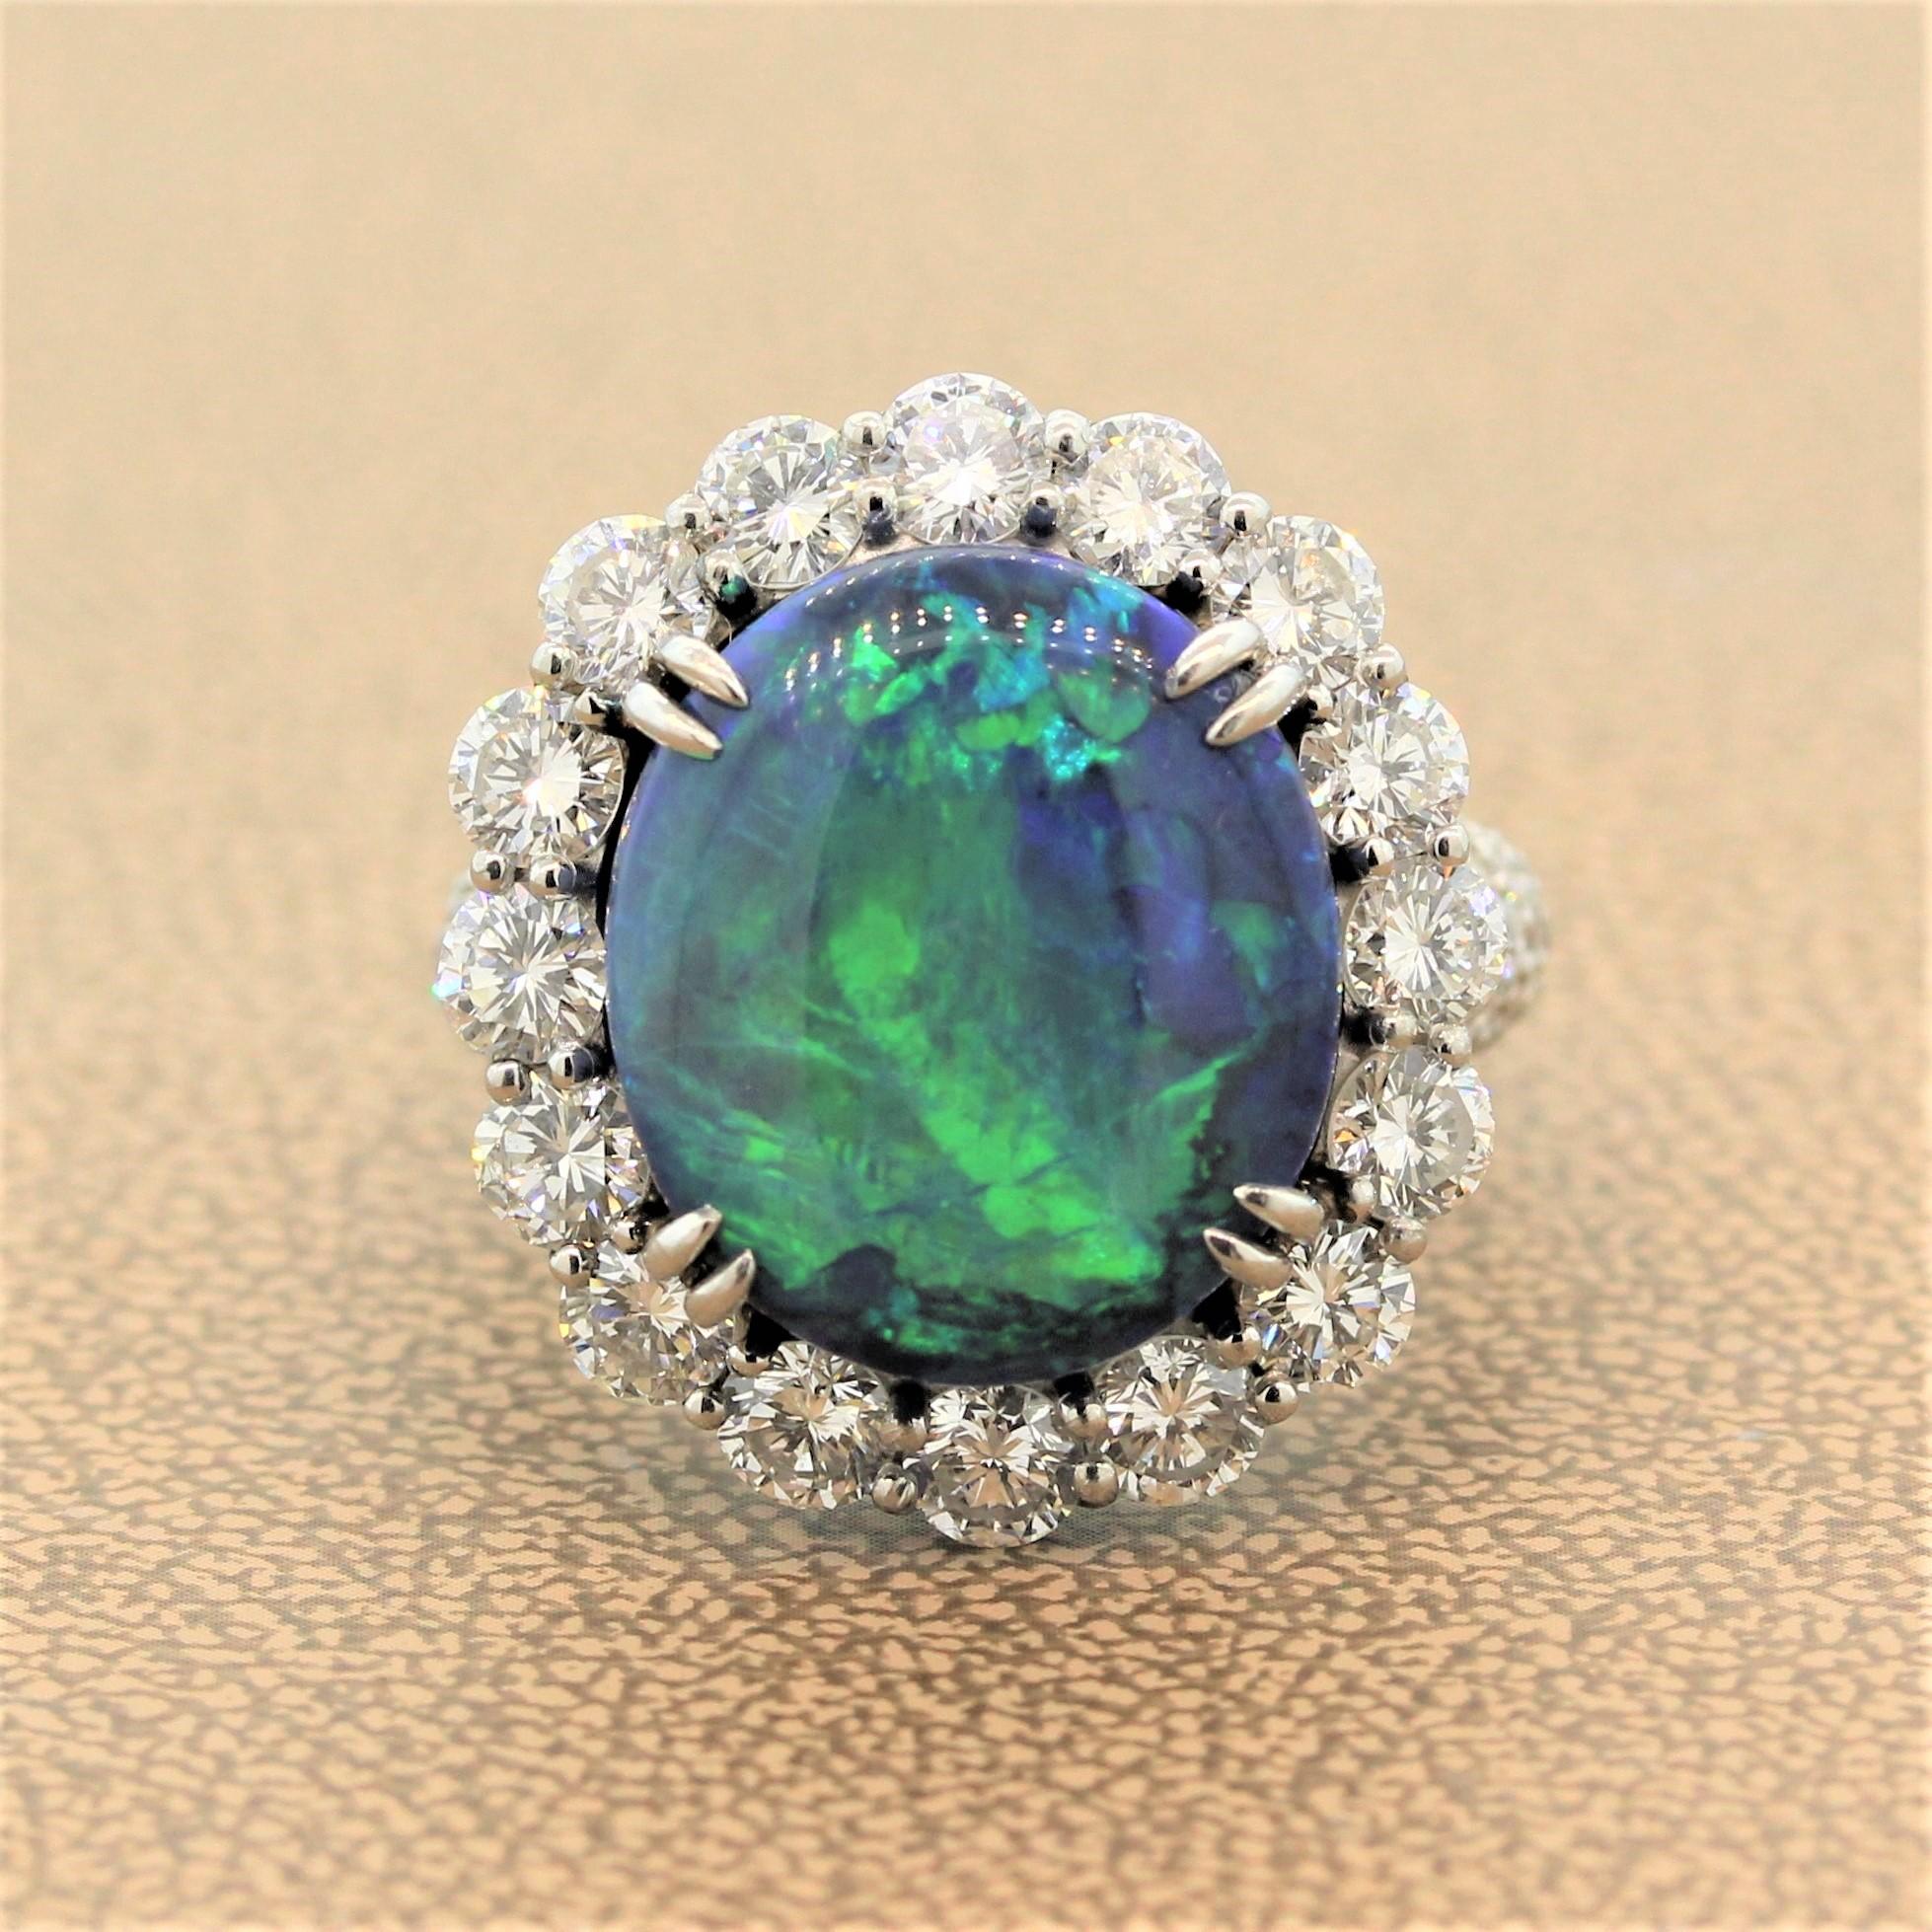 A remarkable ring featuring a 10.47 carat Australian opal with gorgeous play of color. Shimmering hues of blues and greens flash as the light rolls across the gemstone. To keep up with the lavish opal are 4.08 carats of round brilliant cut diamonds